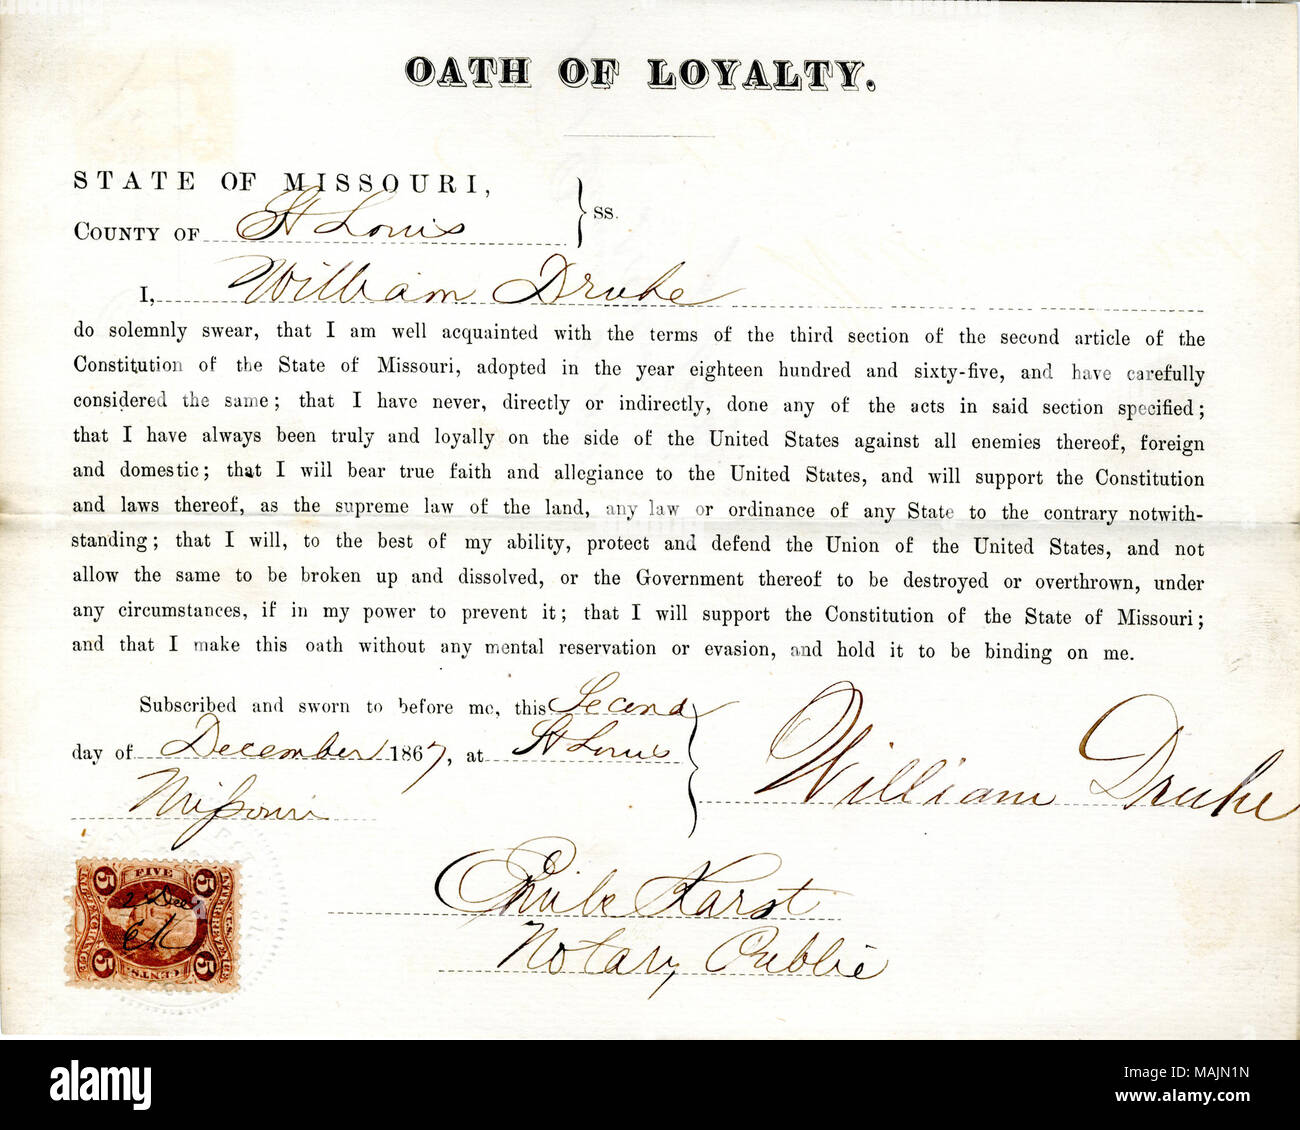 Swears oath of allegiance to the Government of the United States and the State of Missouri. Title: Loyalty oath of William Druhe of Missouri, County of St. Louis  . 5 December 1867. Druhe, William Stock Photo